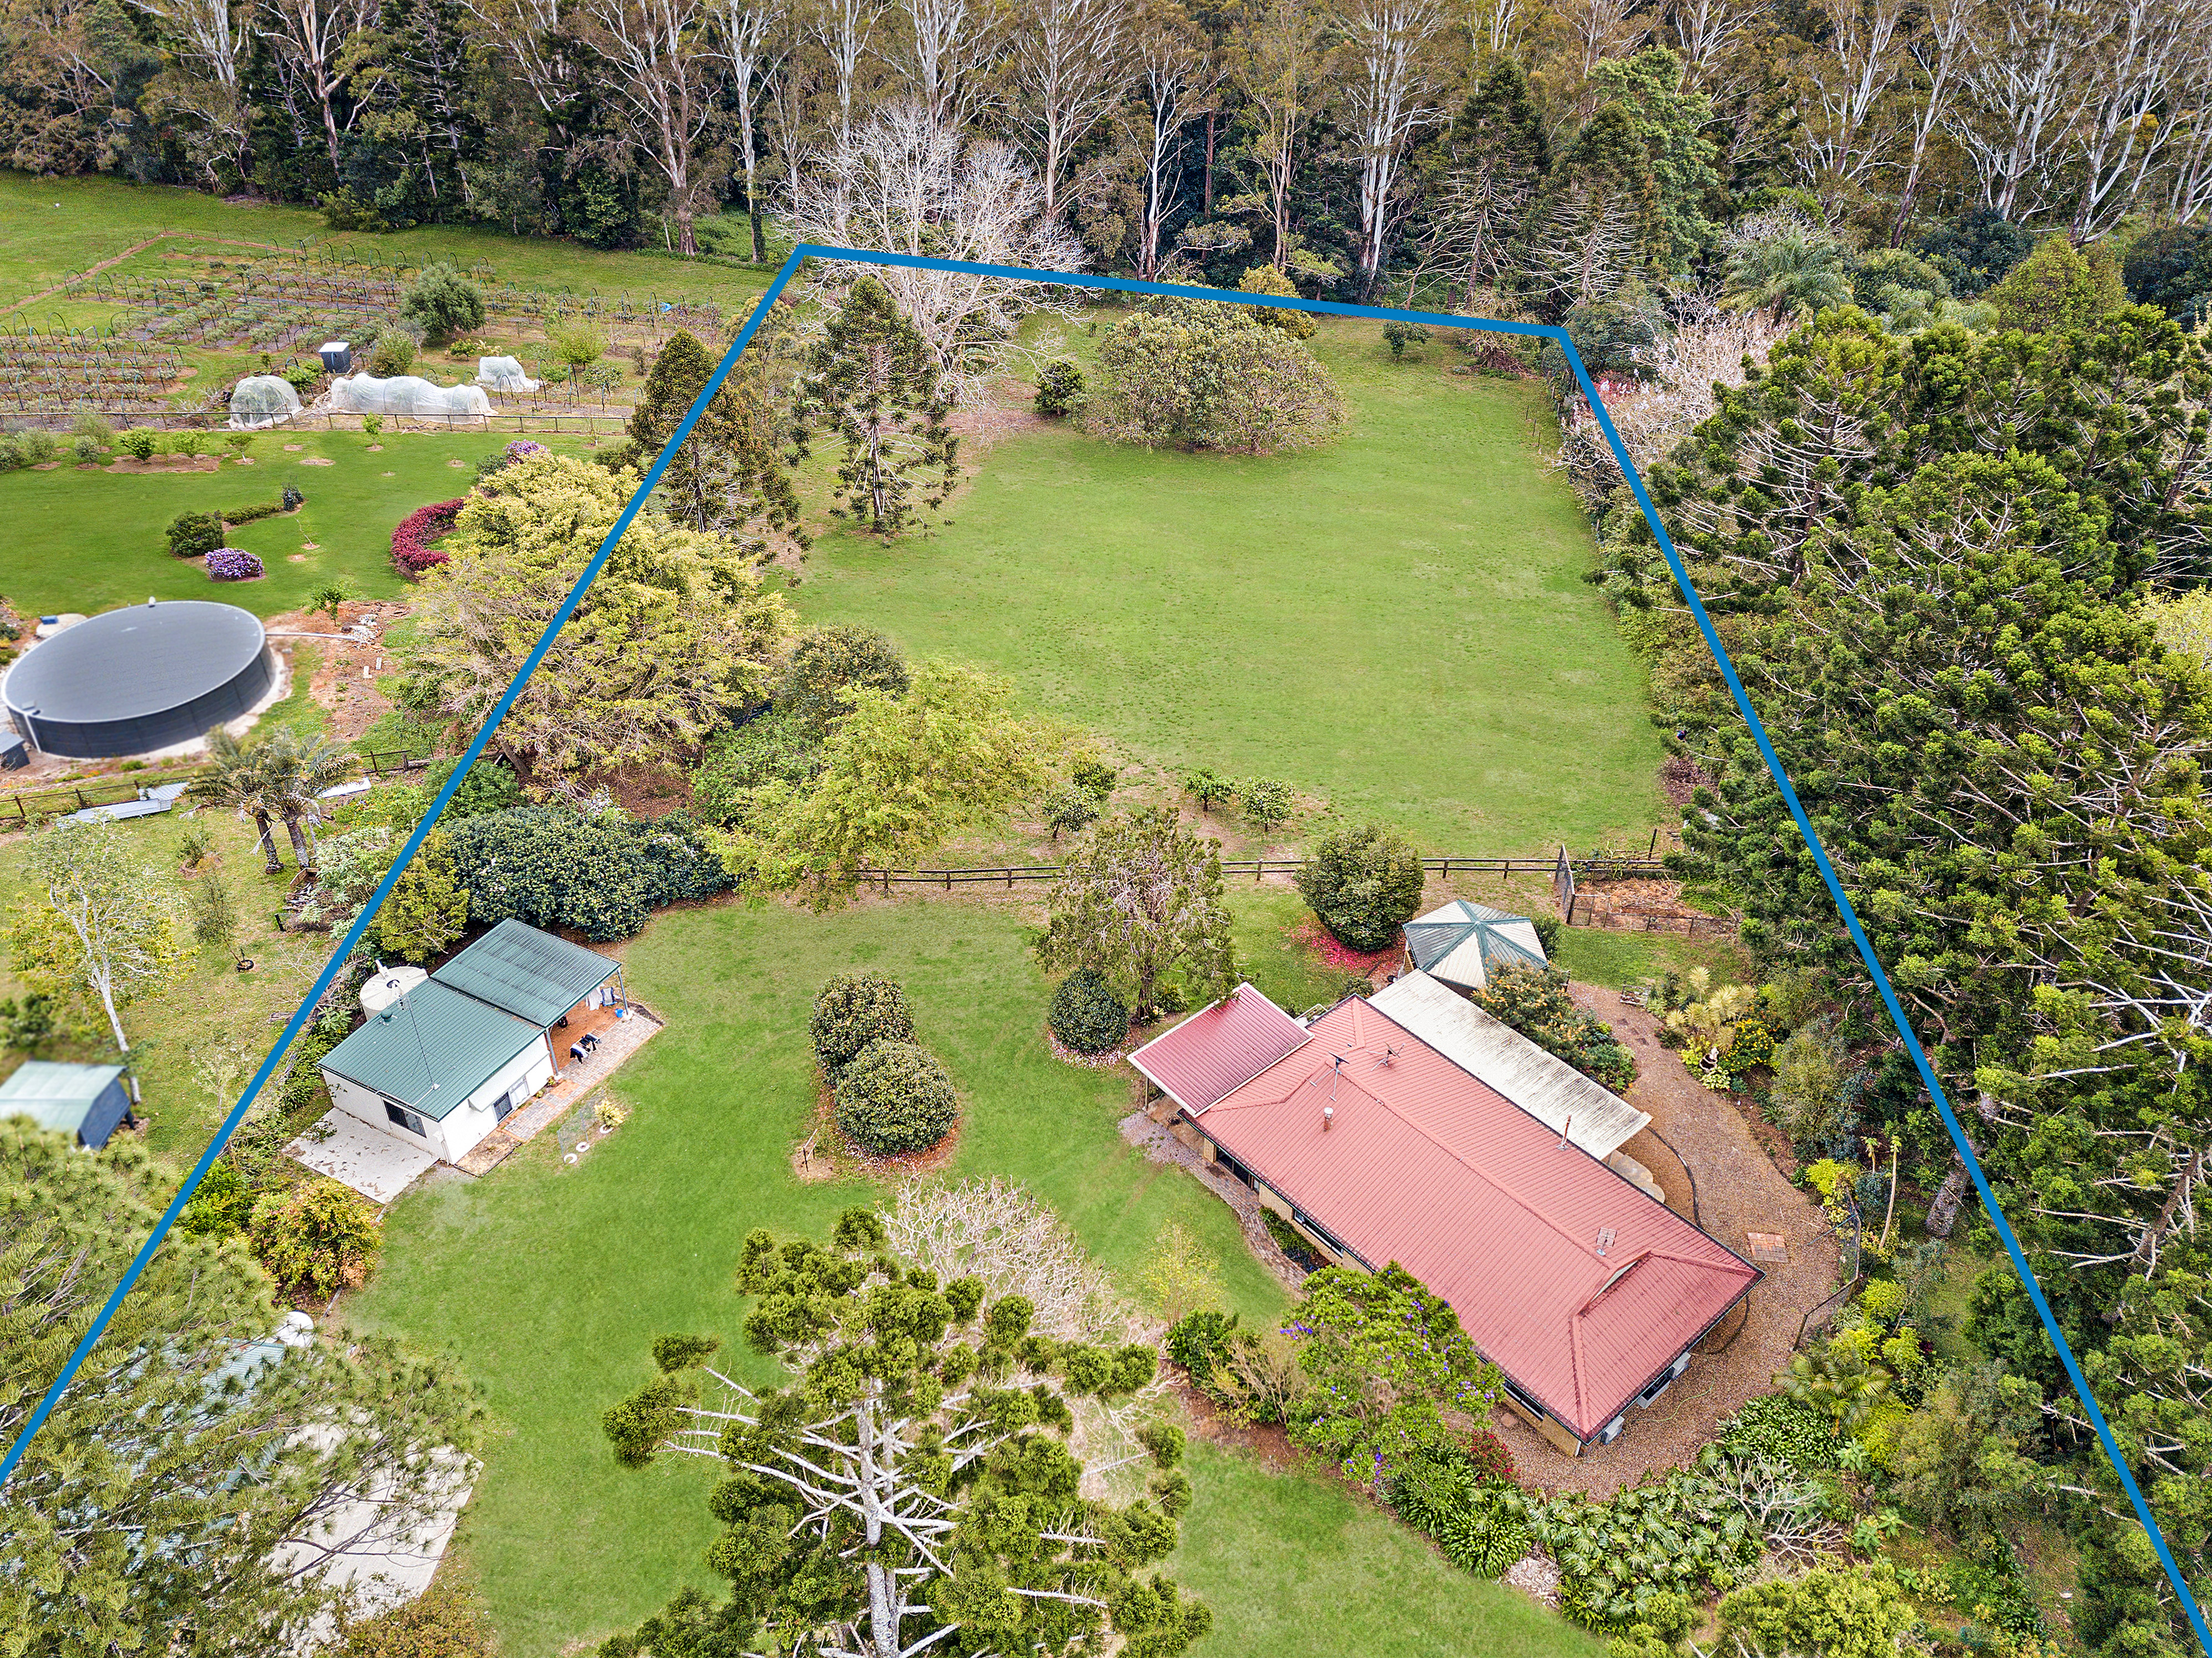 Property in Witta - Sold for $950,000